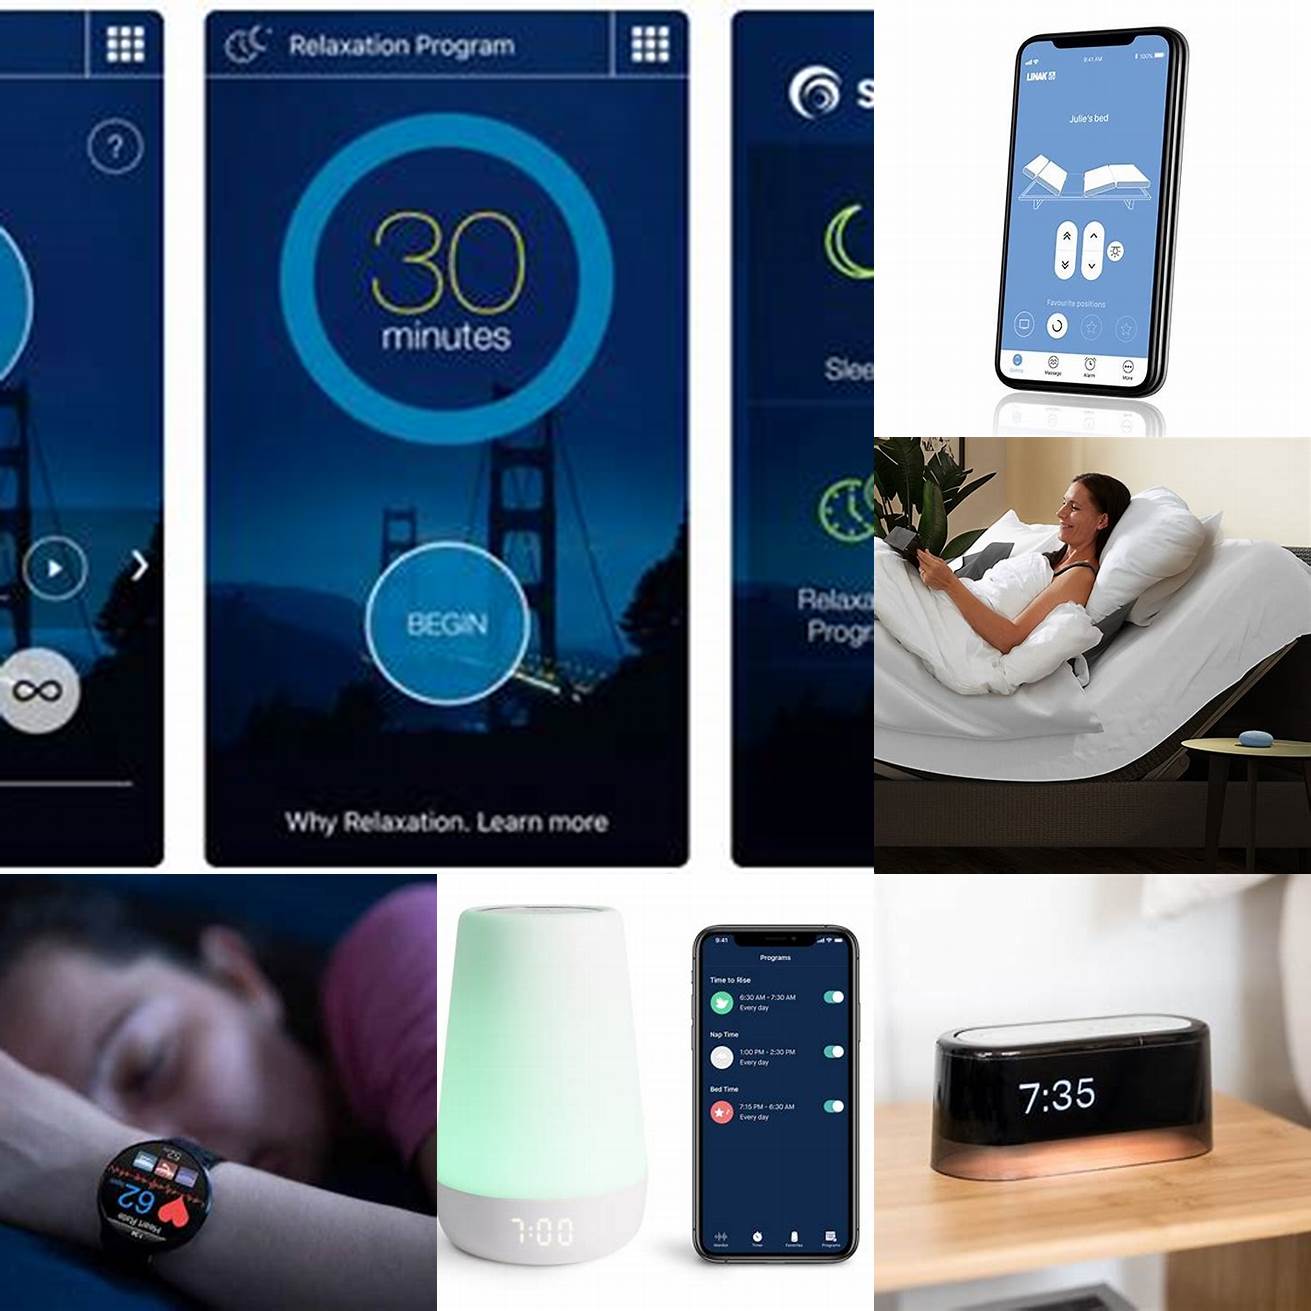 The mobile app allows you to control the beds settings and monitor your sleeping patterns